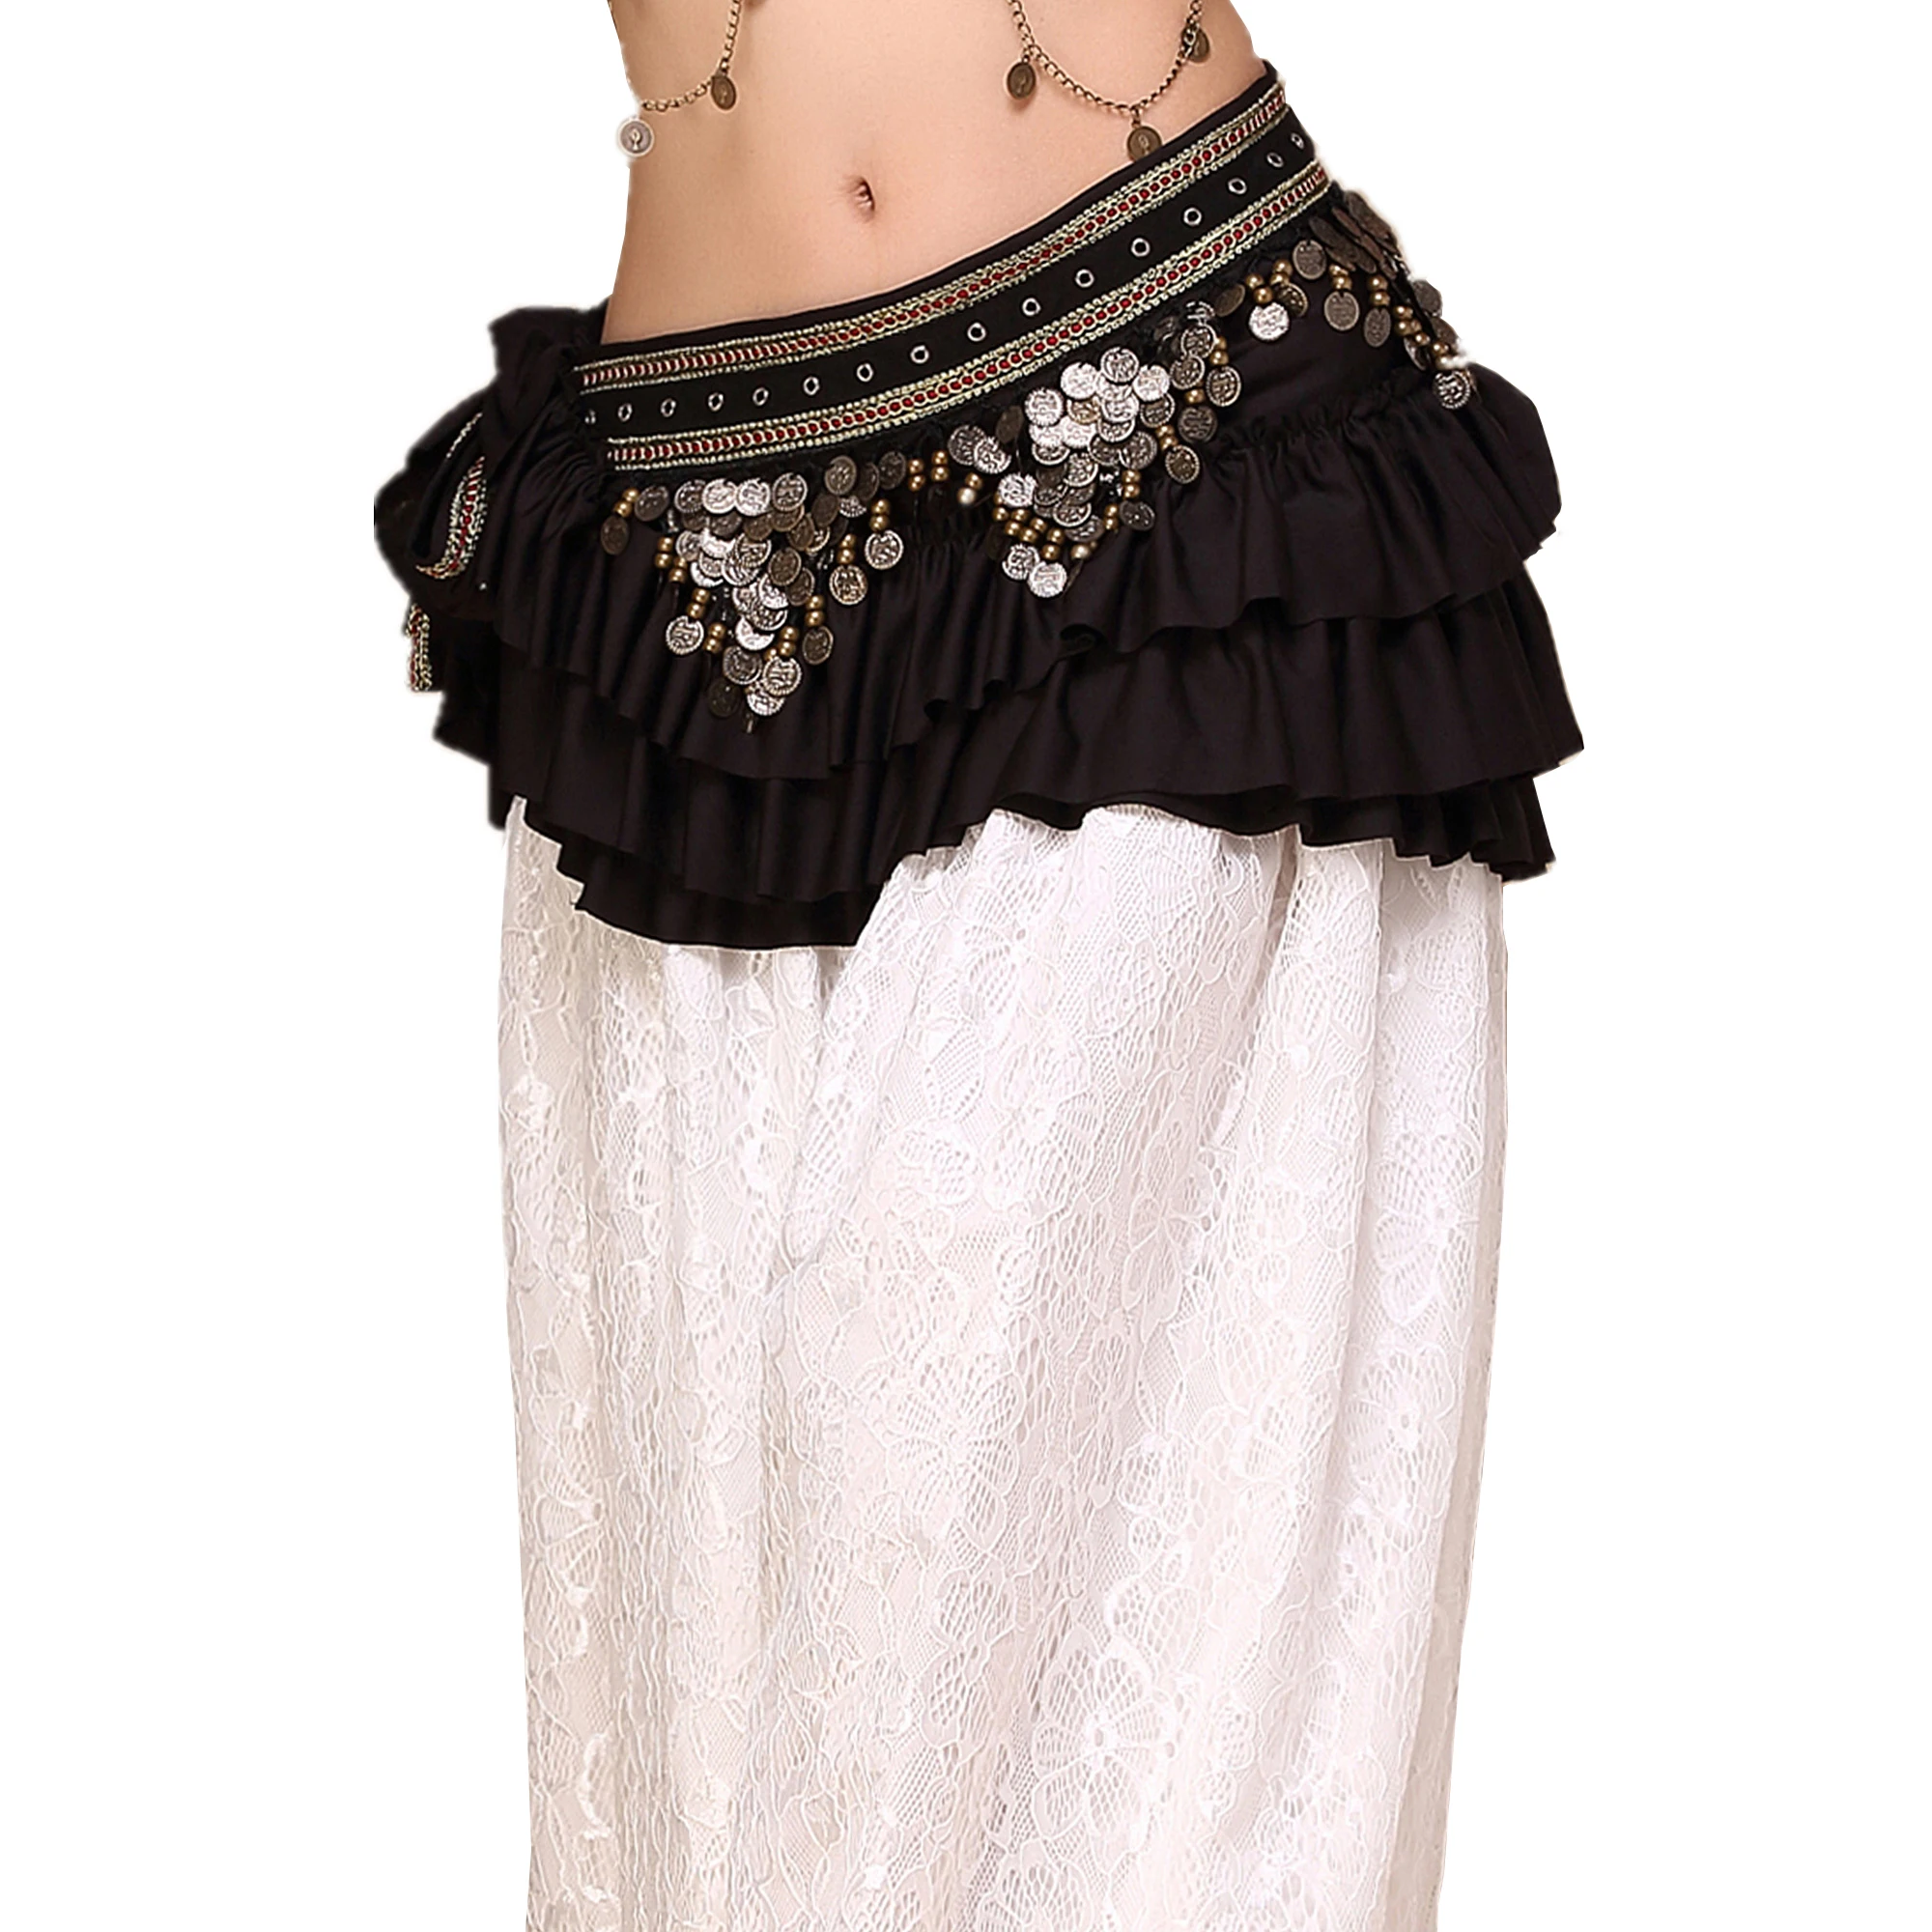 HMMJ Womens Tribal Style Belly Dance Hip Scarf Belt Performance Outfits Skirt